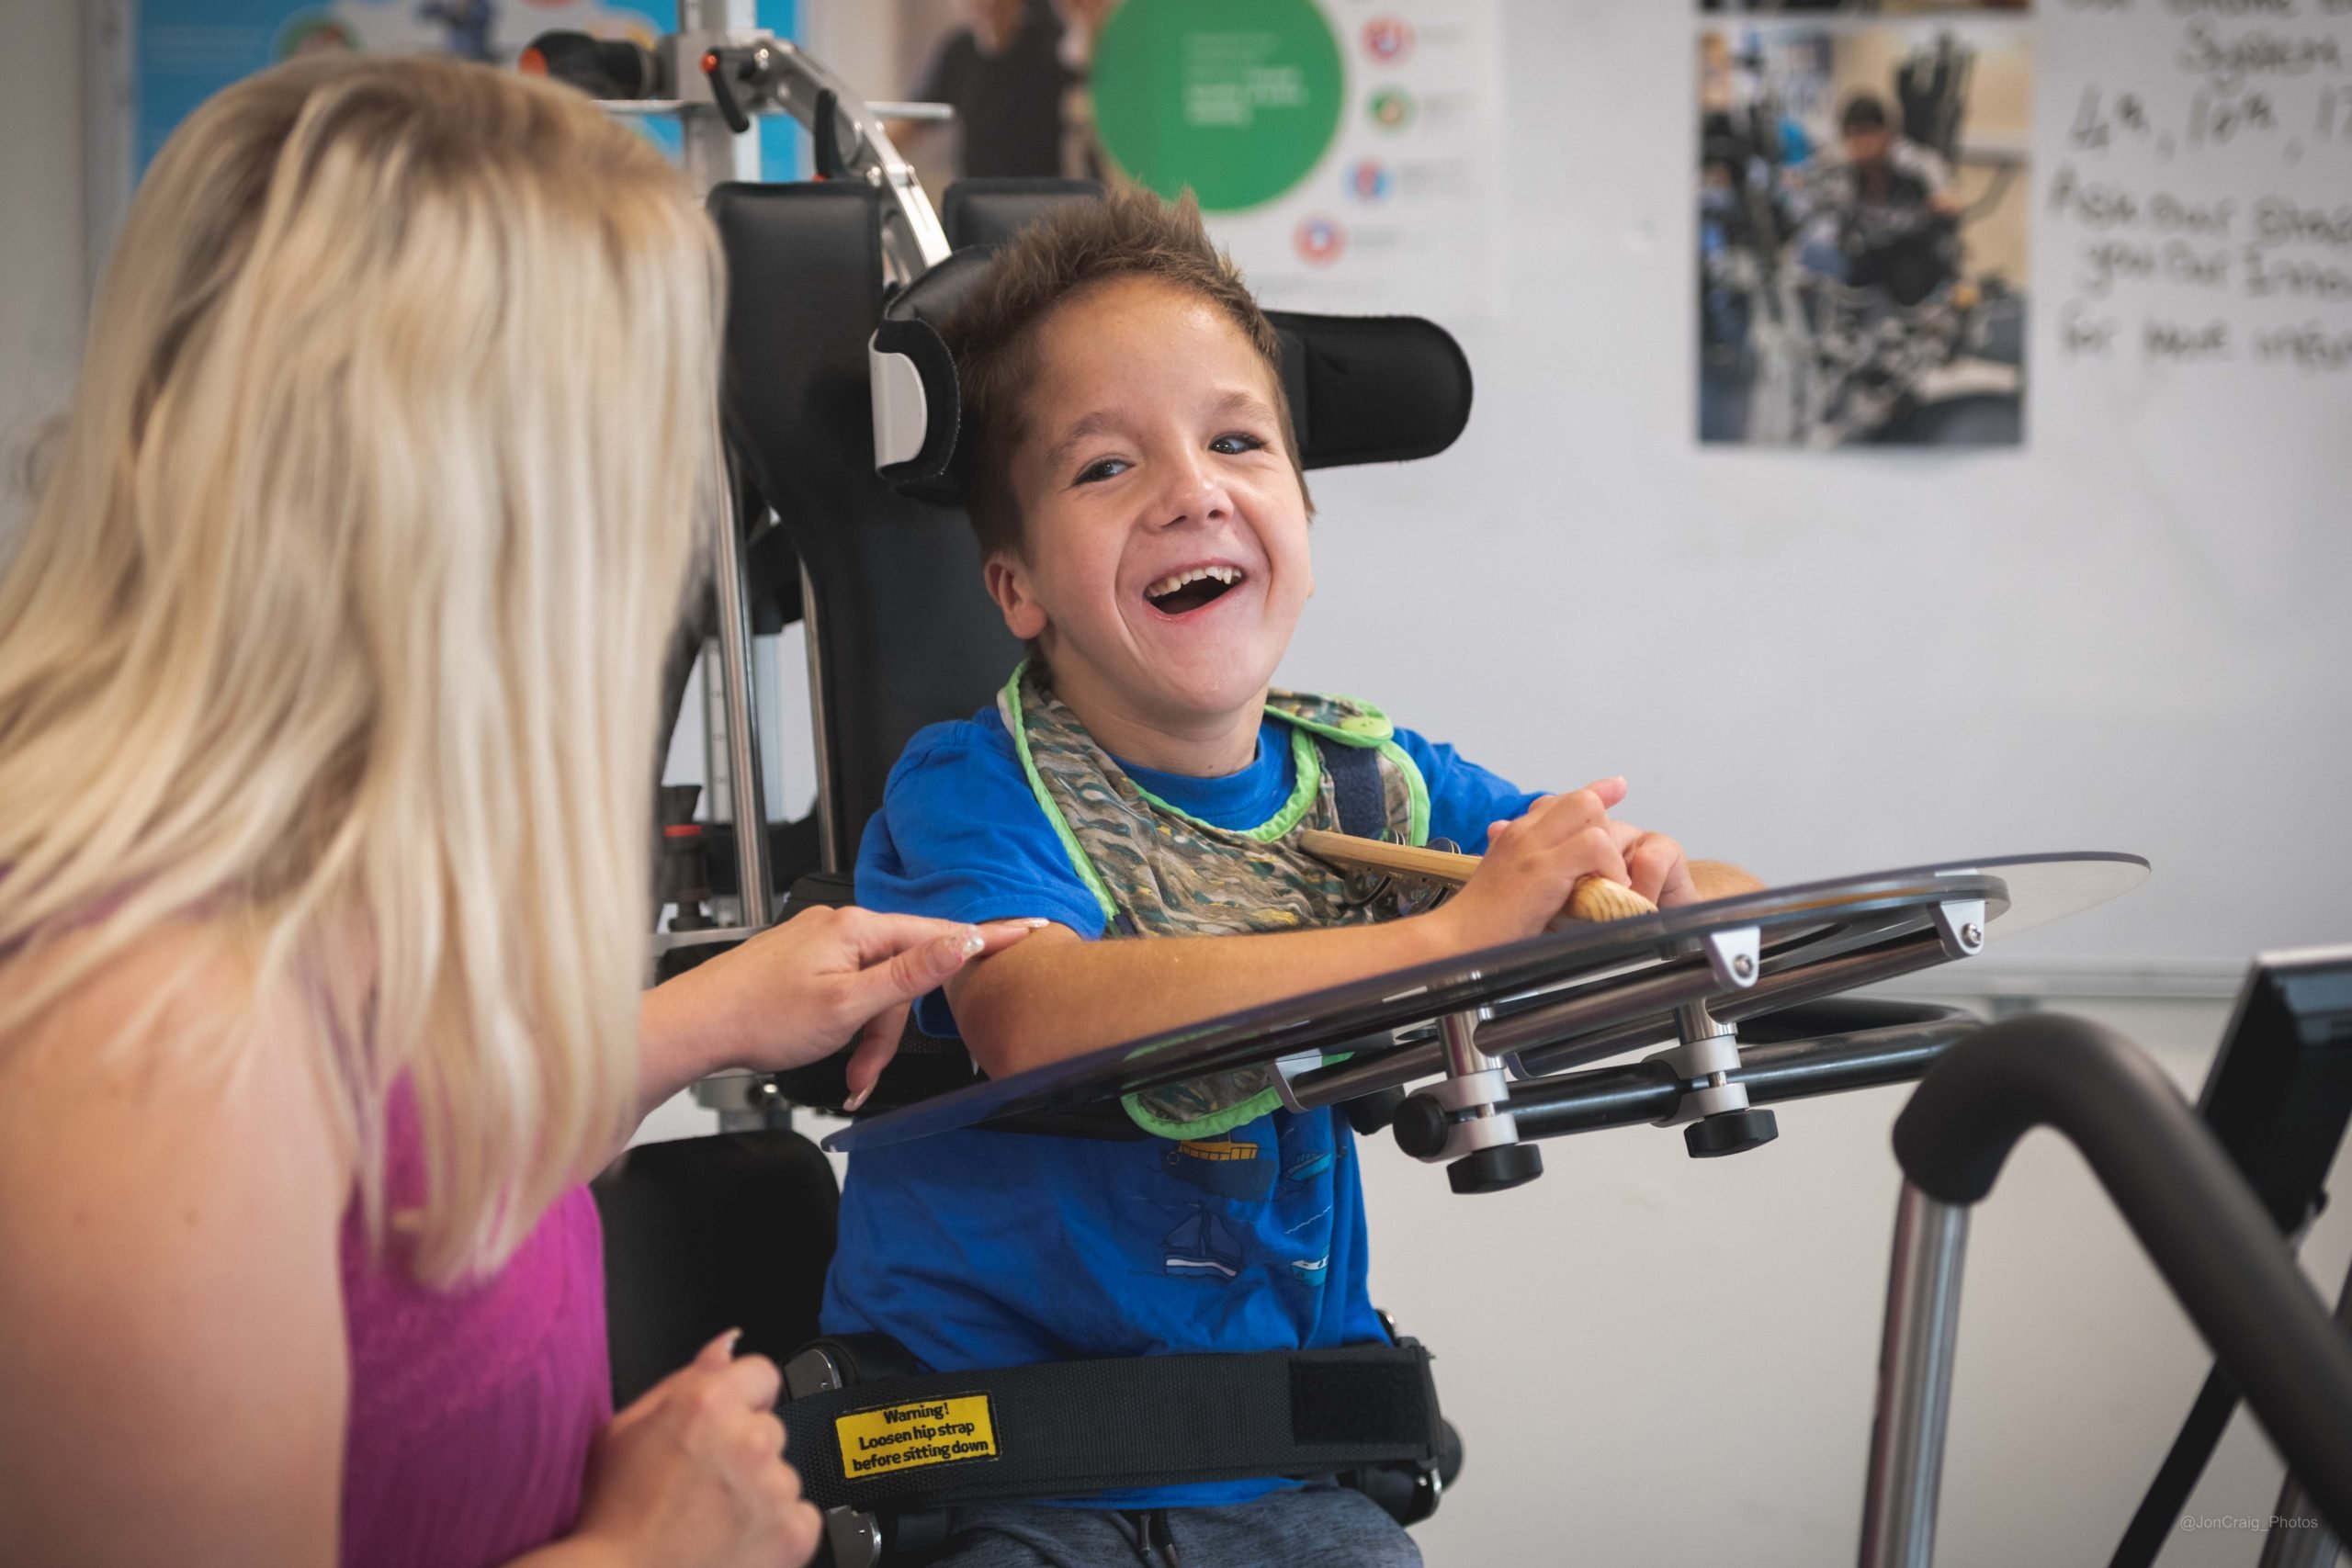 Gympanzees: Building the UK’s first fully accessible leisure facility